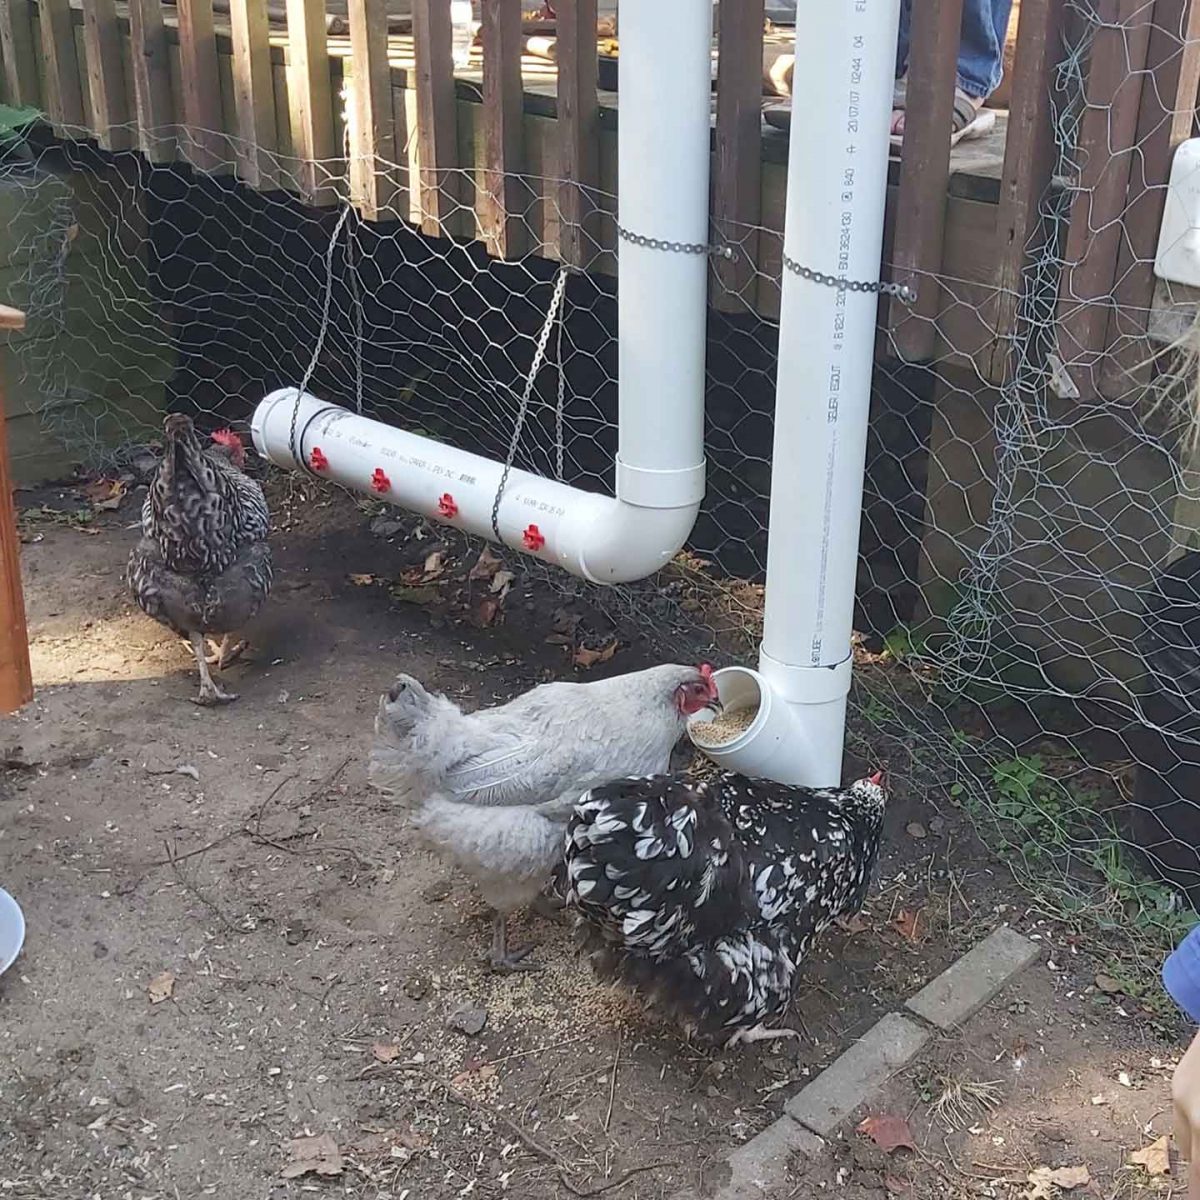 Two chickens eating from a pvc chicken gravity feeder